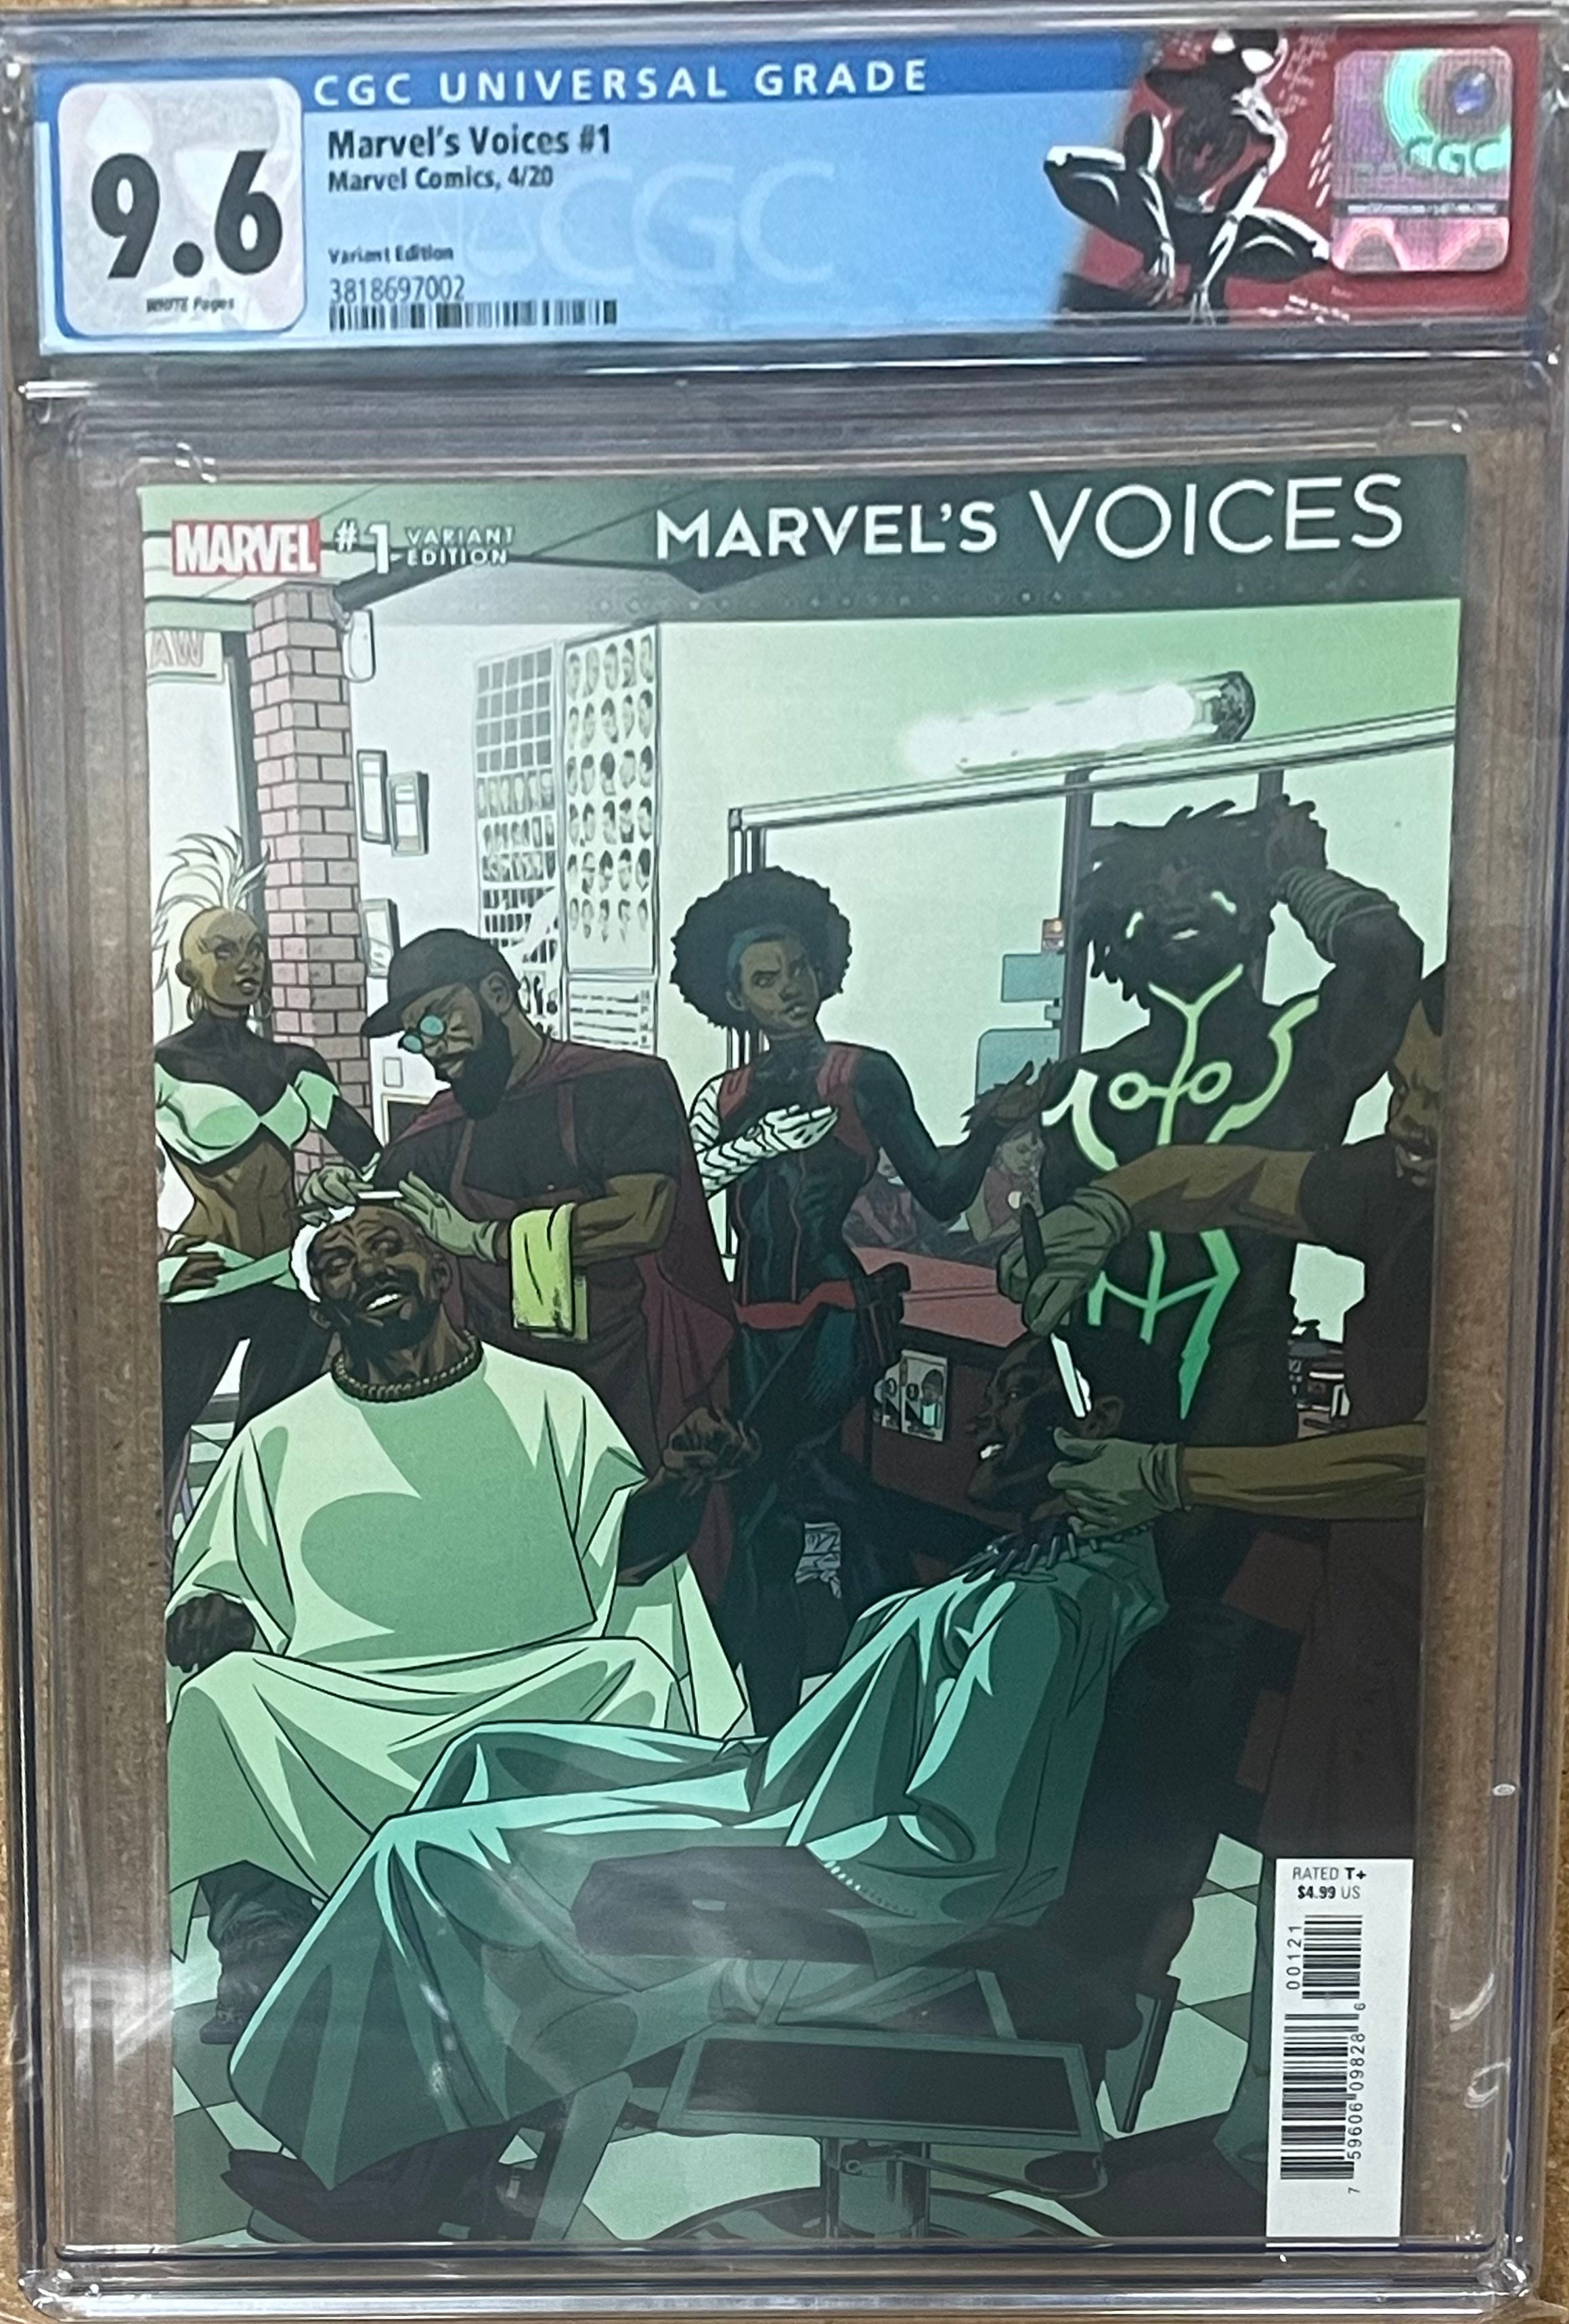 MARVELS VOICES #1 VARIANT EDITION CGC 9.6